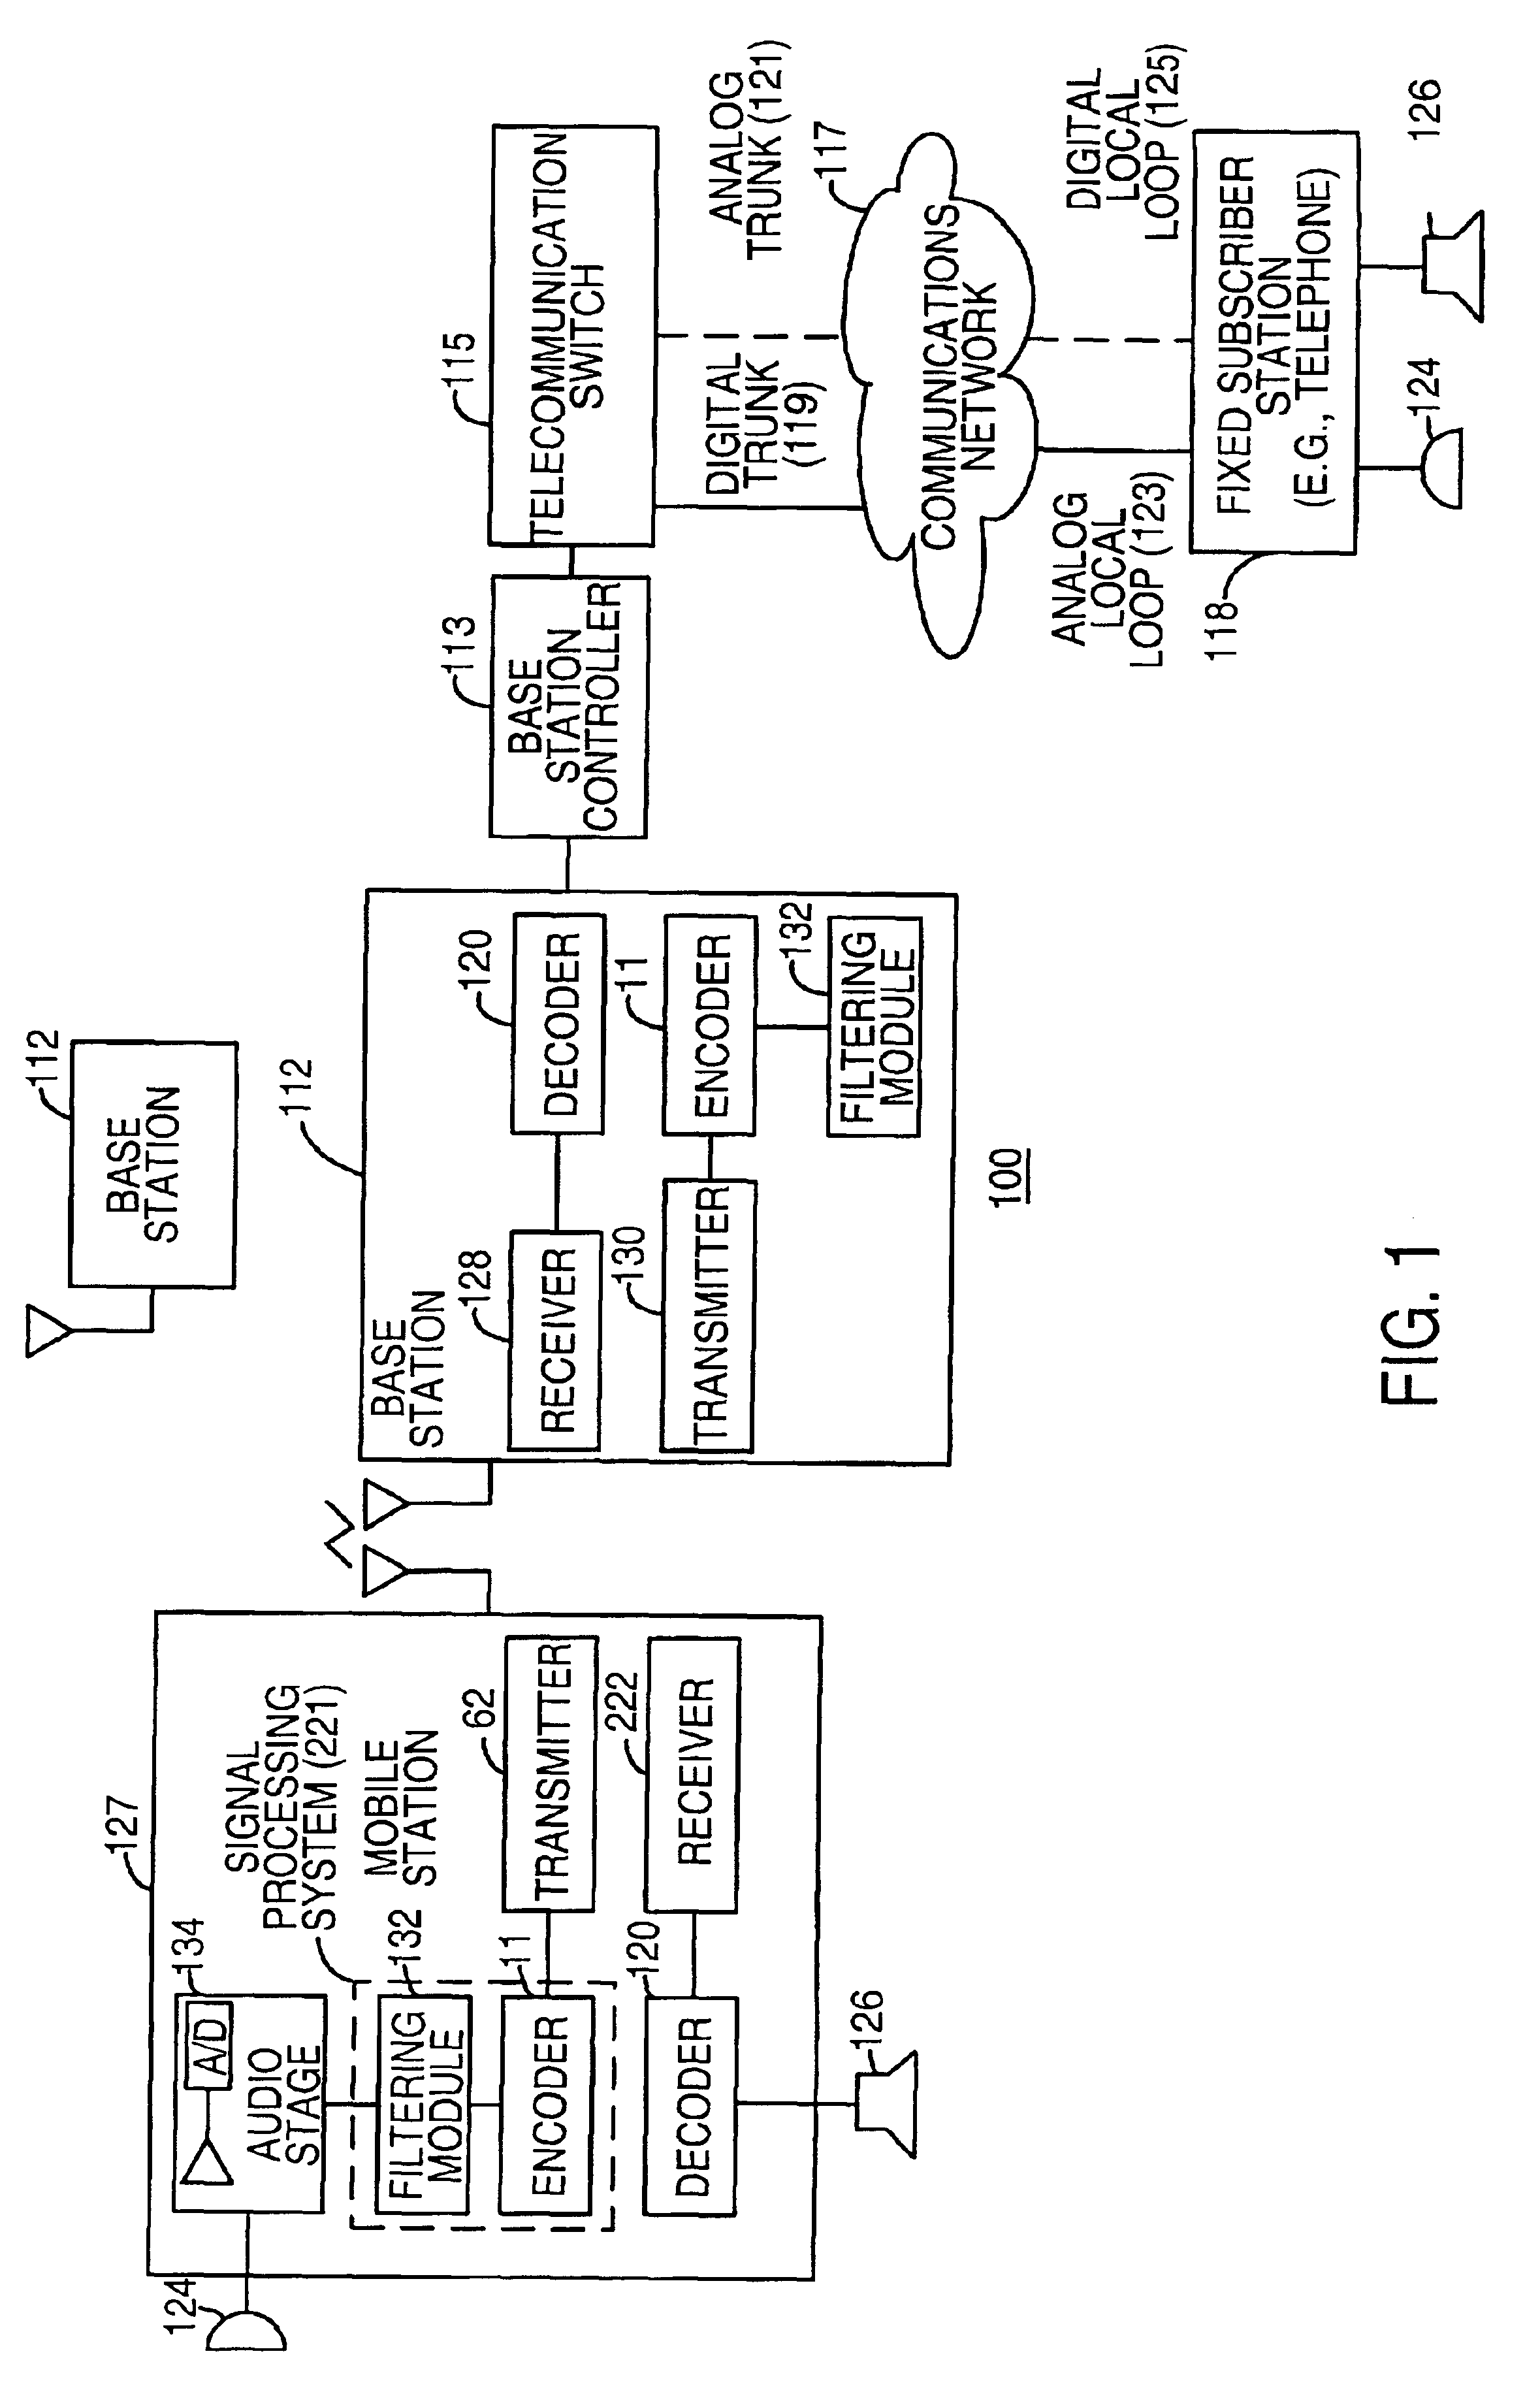 Signal processing system for filtering spectral content of a signal for speech coding